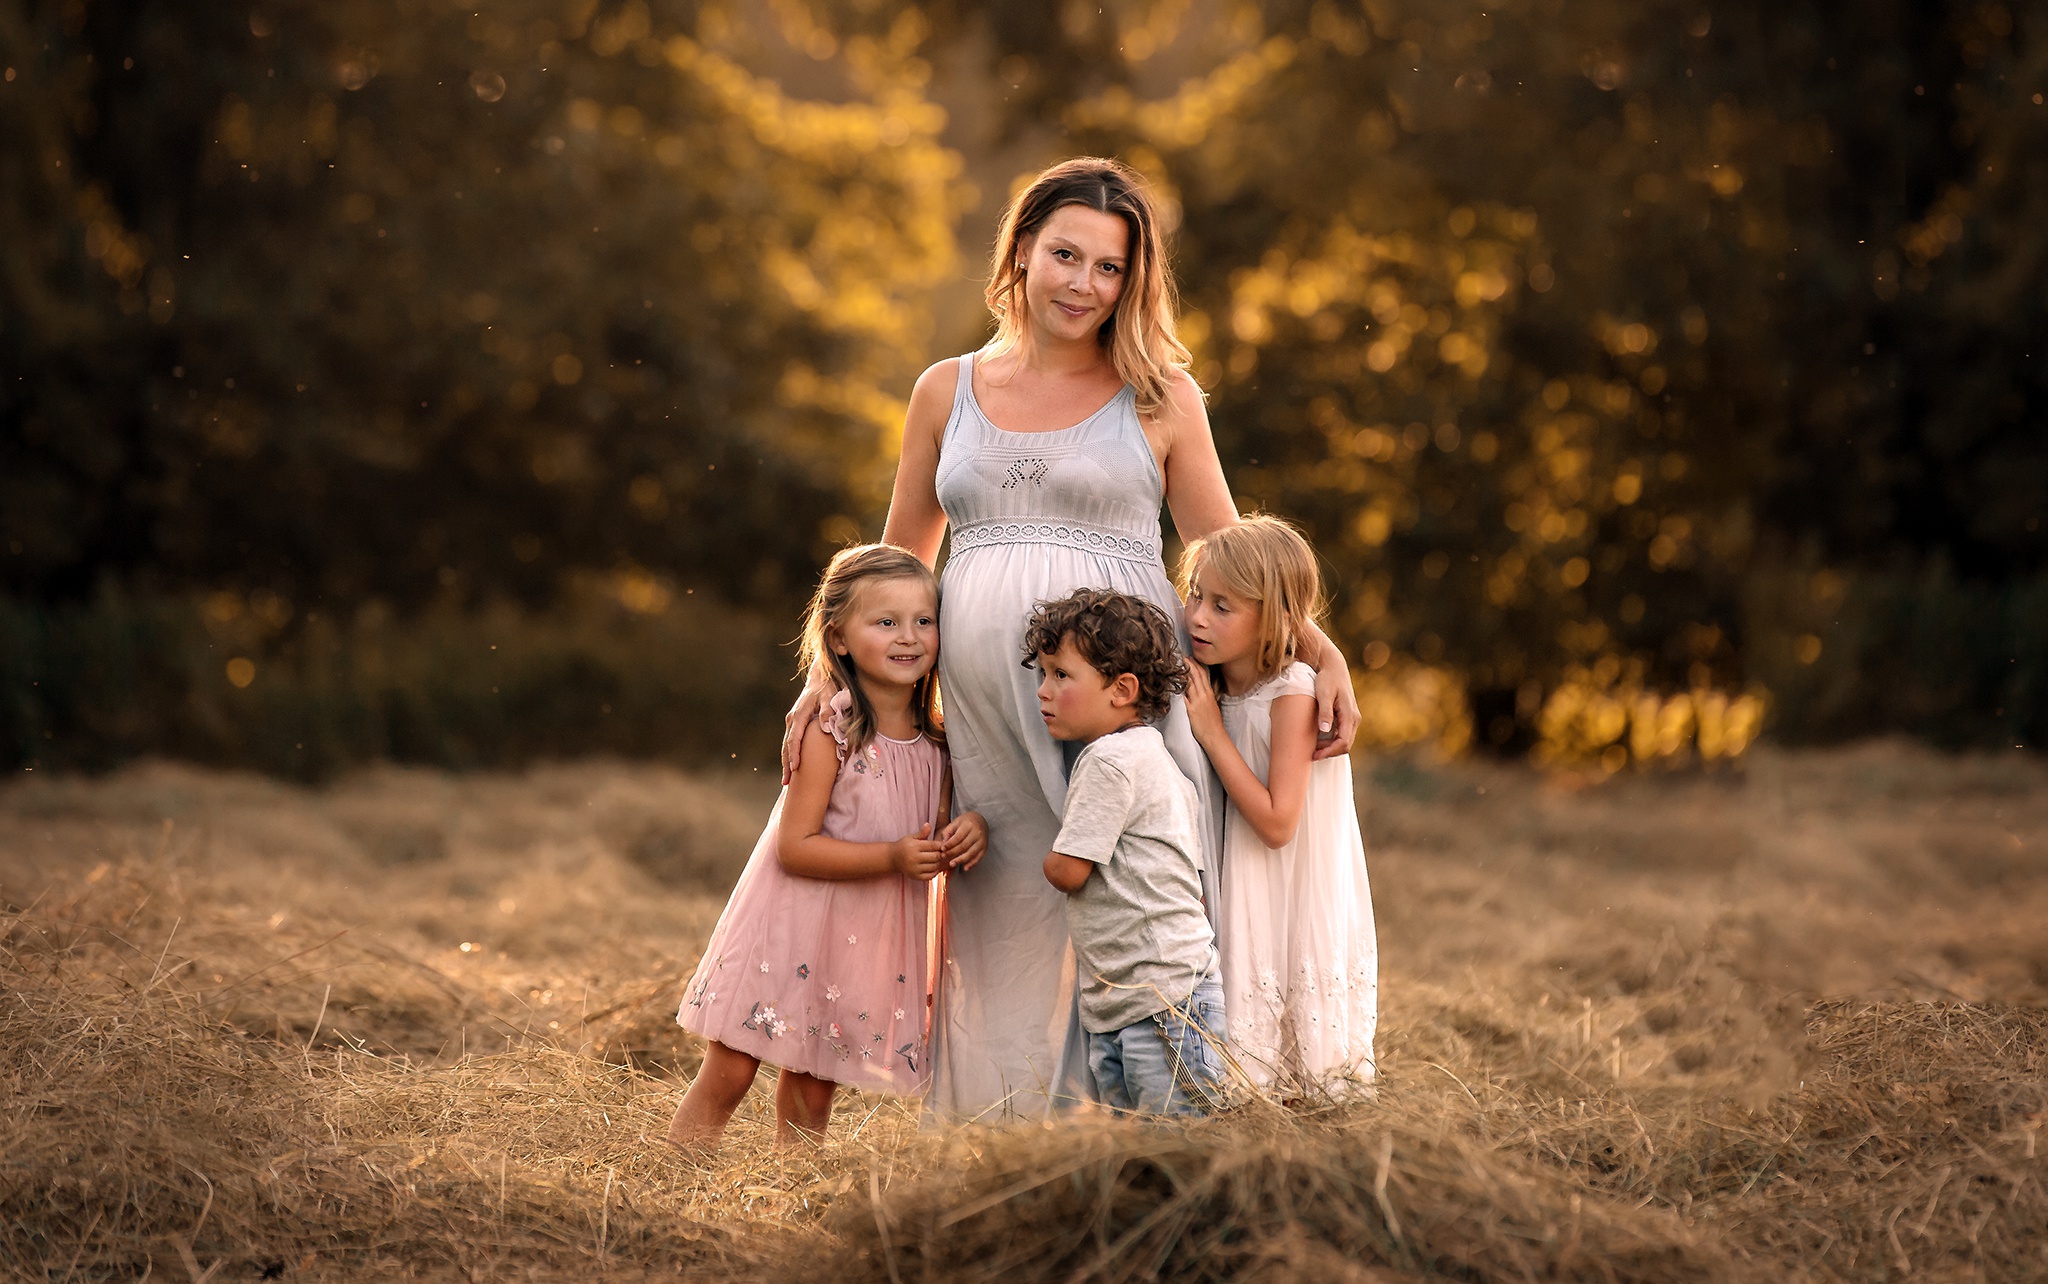 Women Pregnant Mother Children Love Family Warm Happiness Smiling 2048x1284